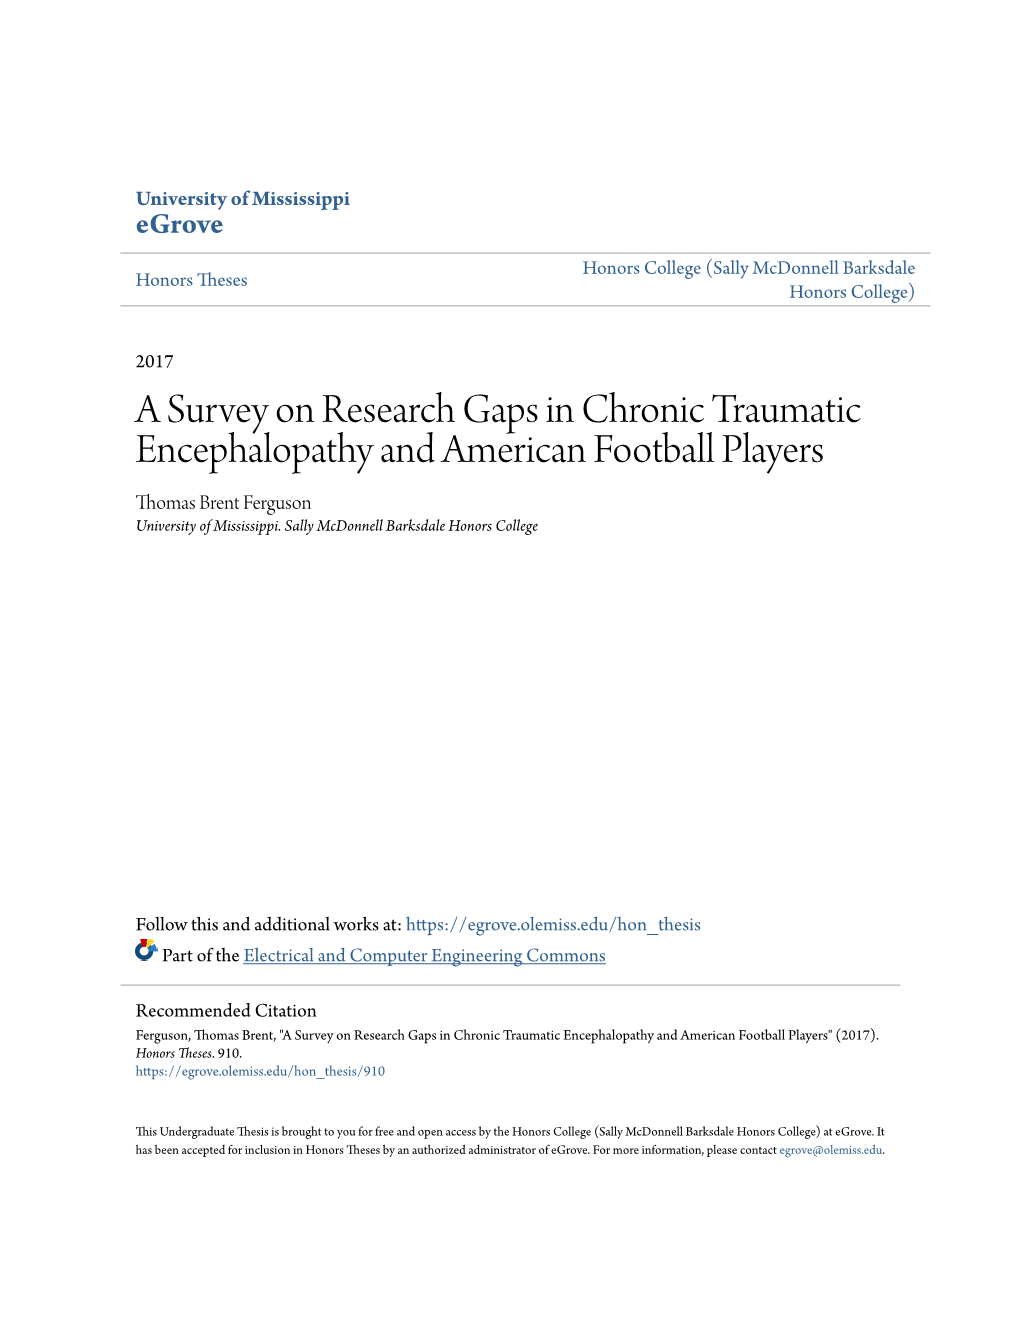 A Survey on Research Gaps in Chronic Traumatic Encephalopathy and American Football Players Thomas Brent Ferguson University of Mississippi